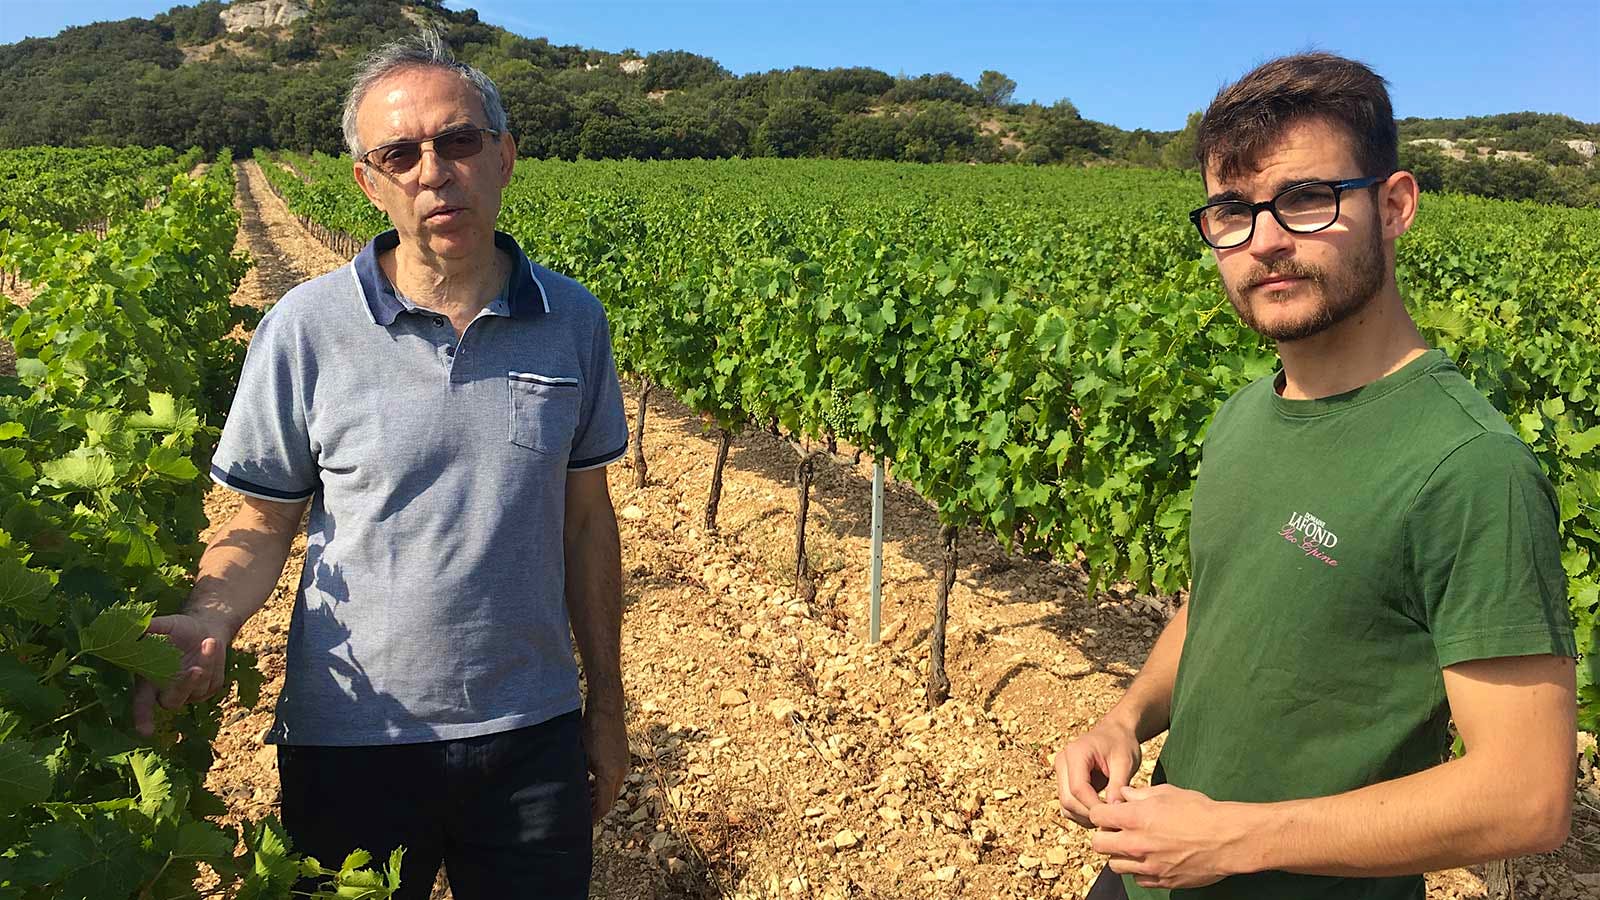 Pascal Lafond and his son François stand in a sunny vineyard in the Vestides section, with light-colored limestone soil and hills in the background.